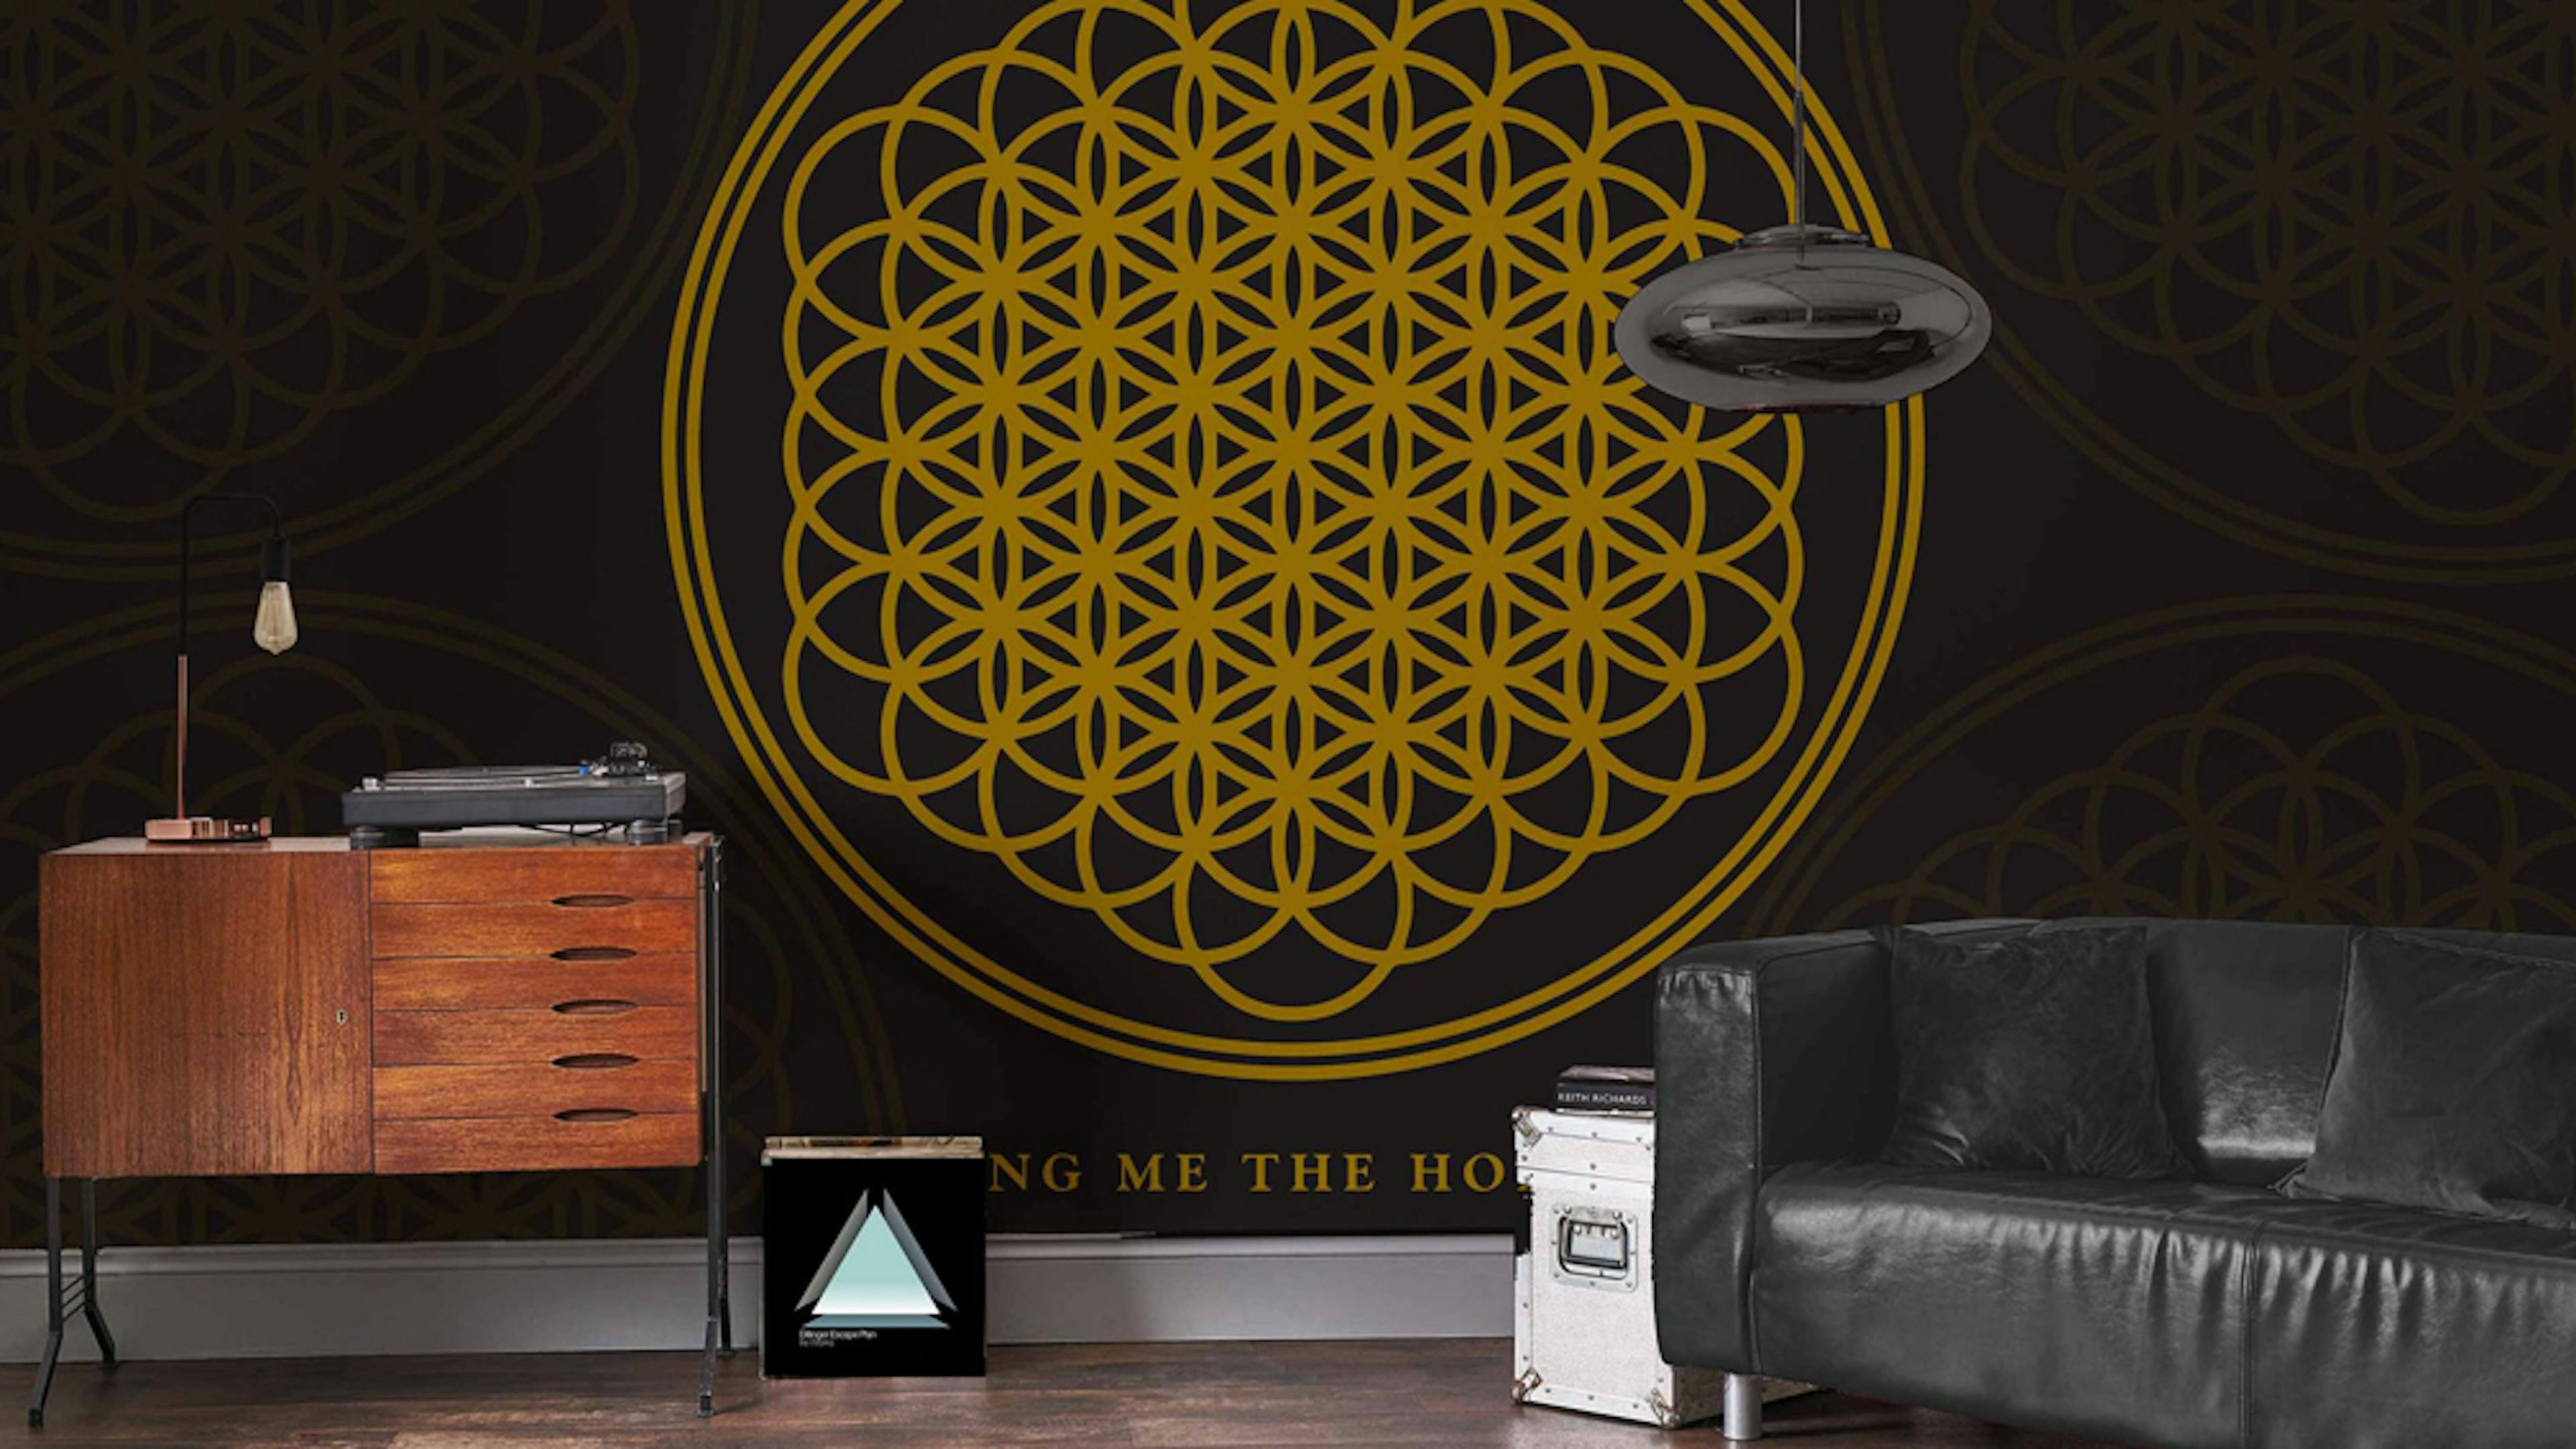 Win An Awesome Band Mural For Your Wall, Courtesy Of Rock Roll